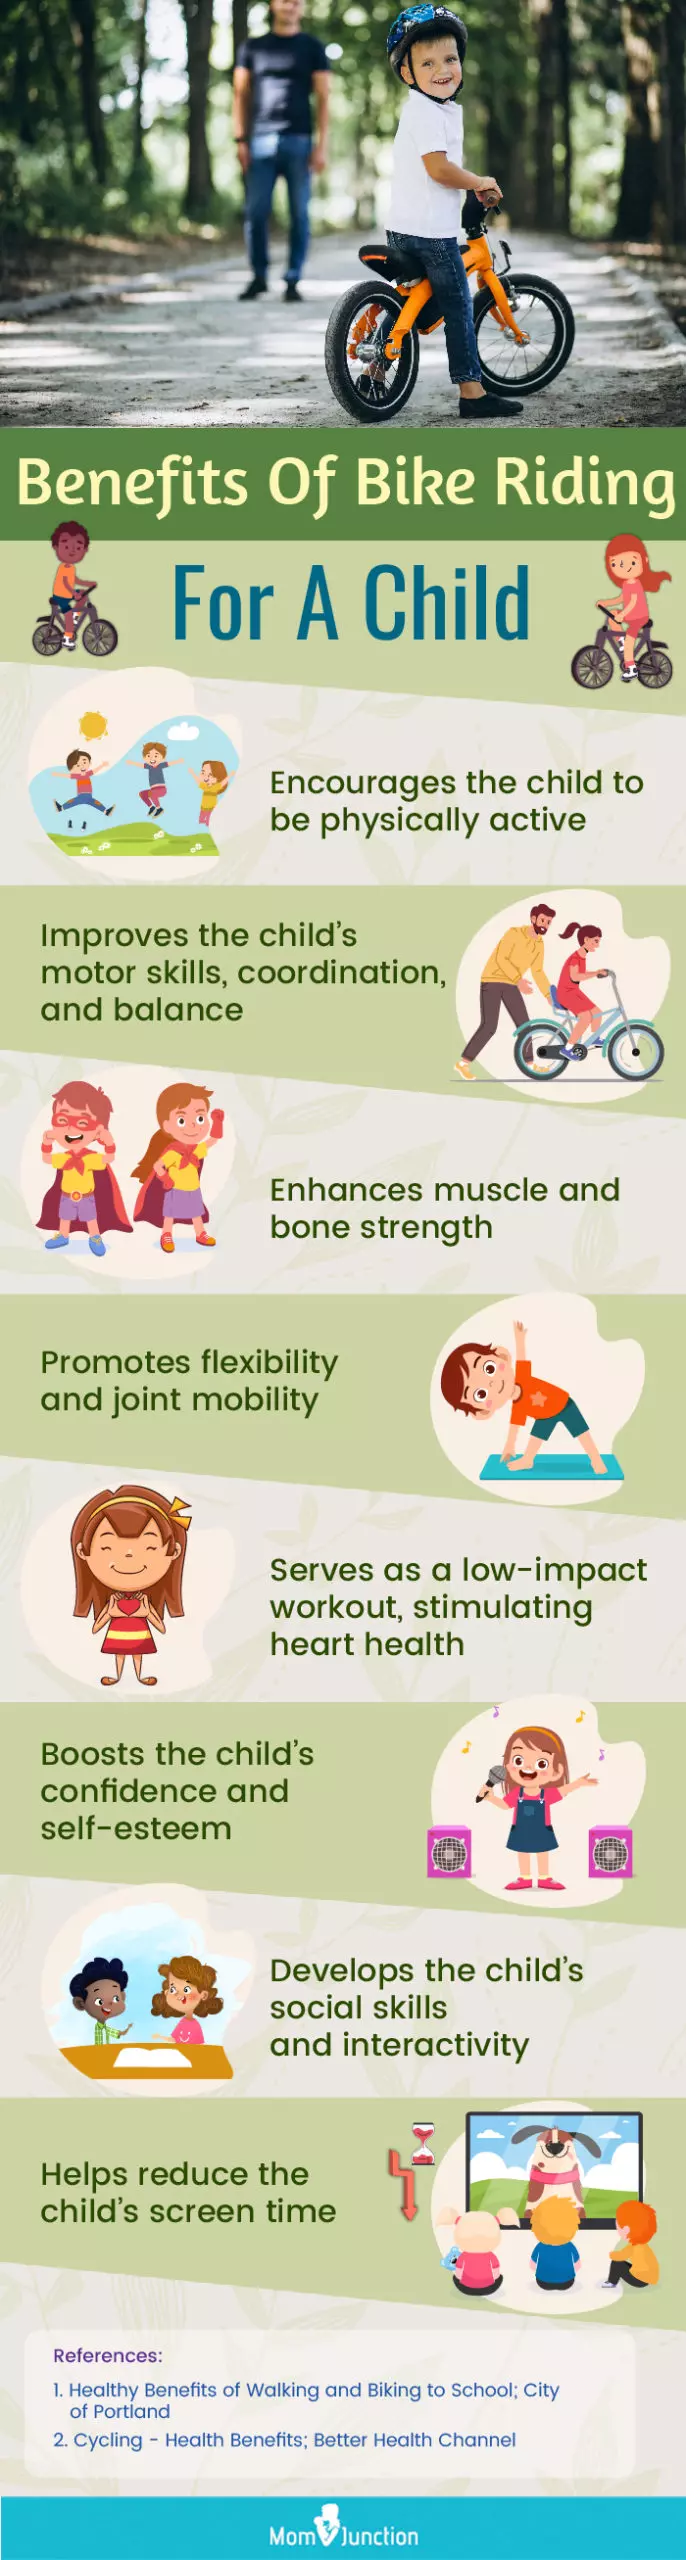 Benefits Of Bike Riding For A Child (infographic)